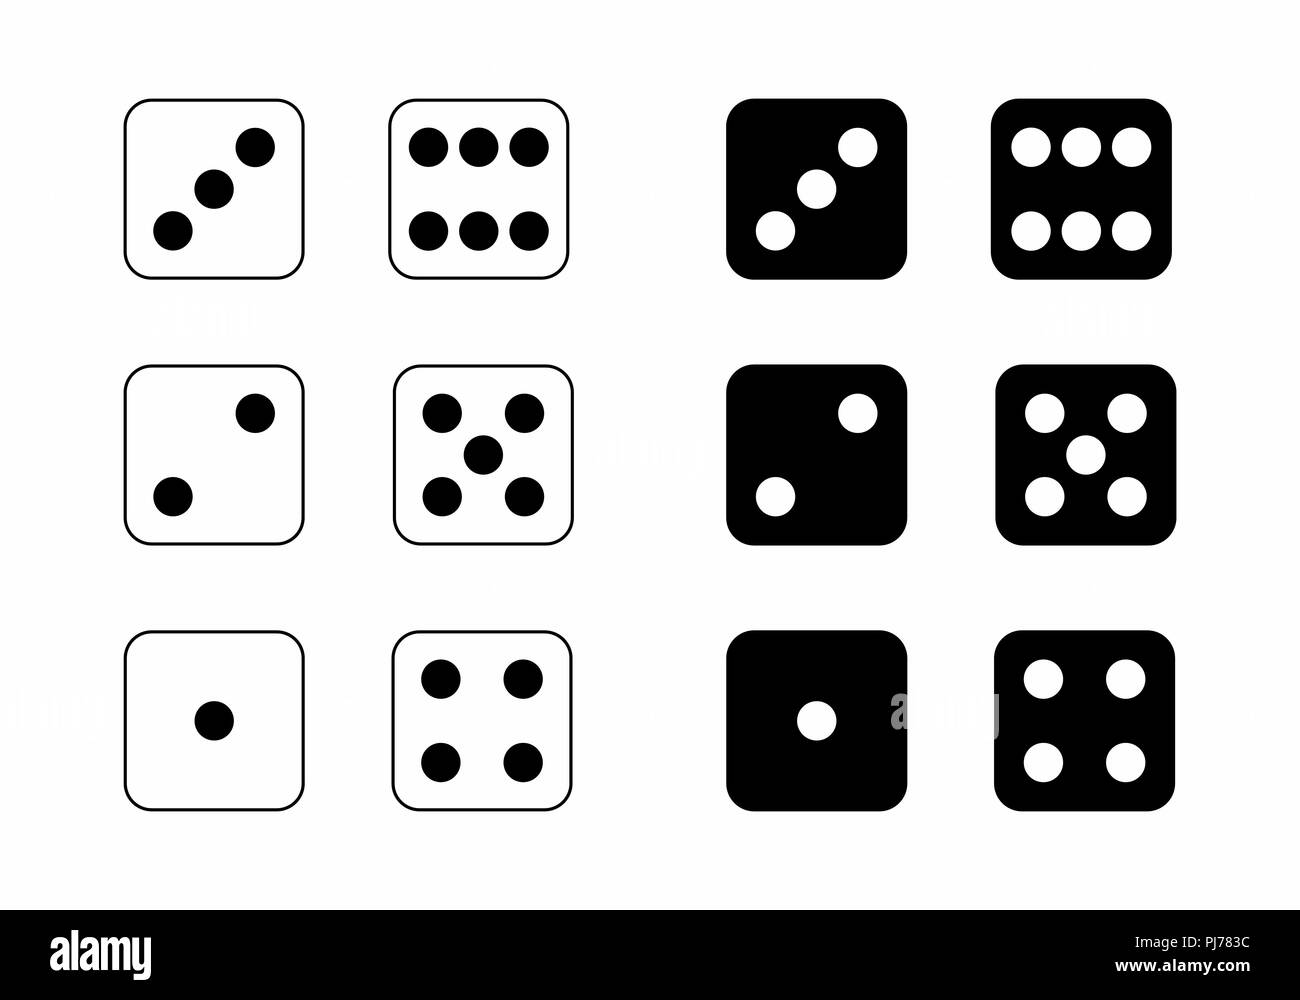 Black and white illustration of dice showing the numbers from 1 to 6 Stock  Vector Image & Art - Alamy